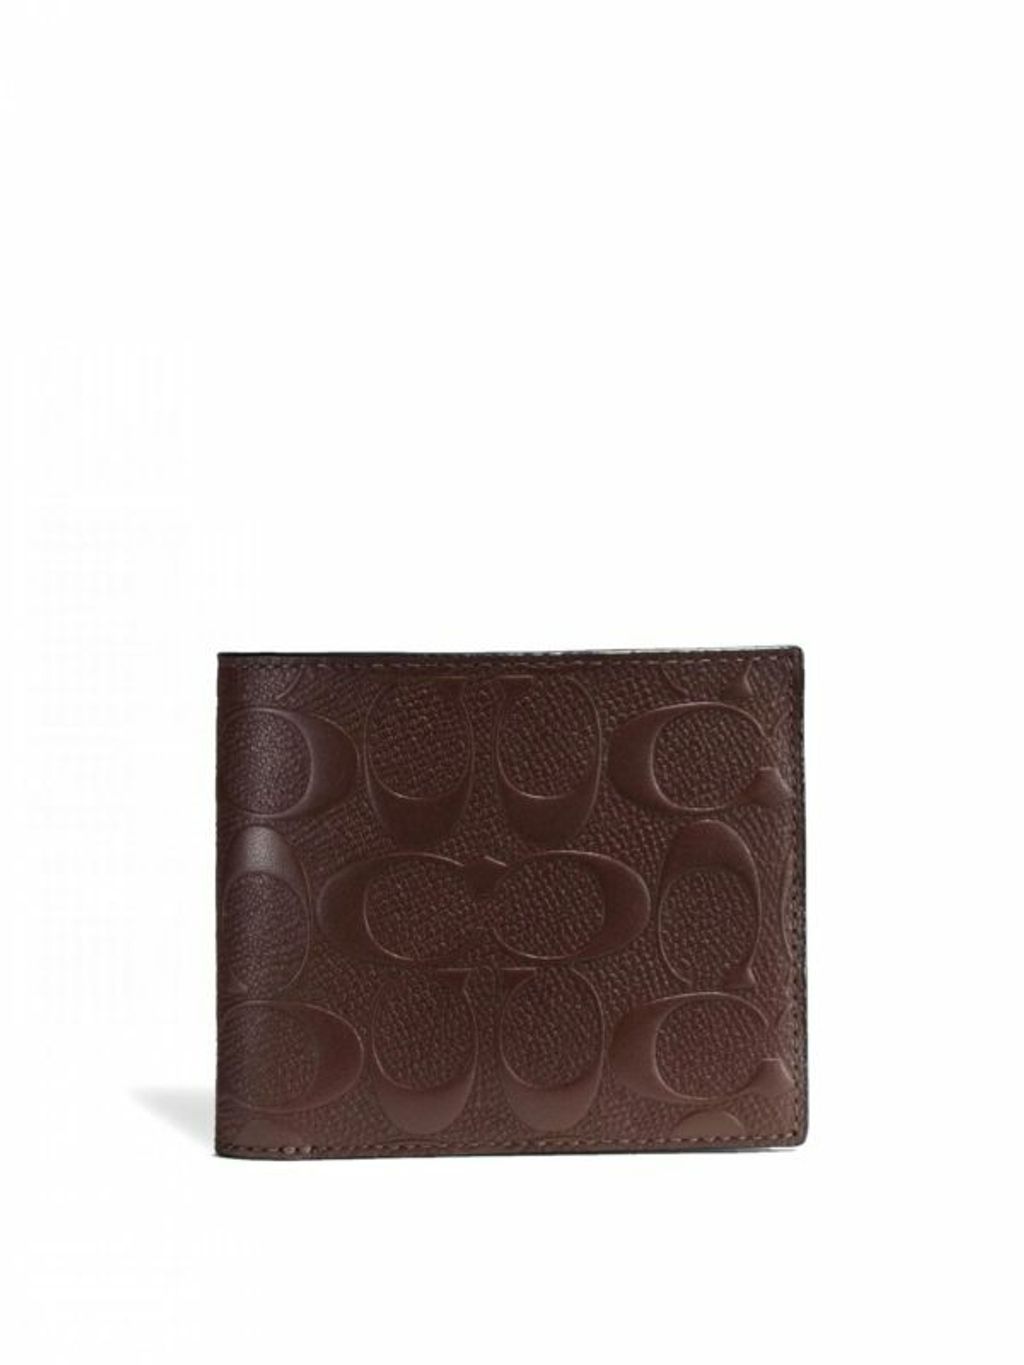 Coach-Compact-ID-Signature-Leather-Mahogany-Front-scaled-1-600x800.jpg